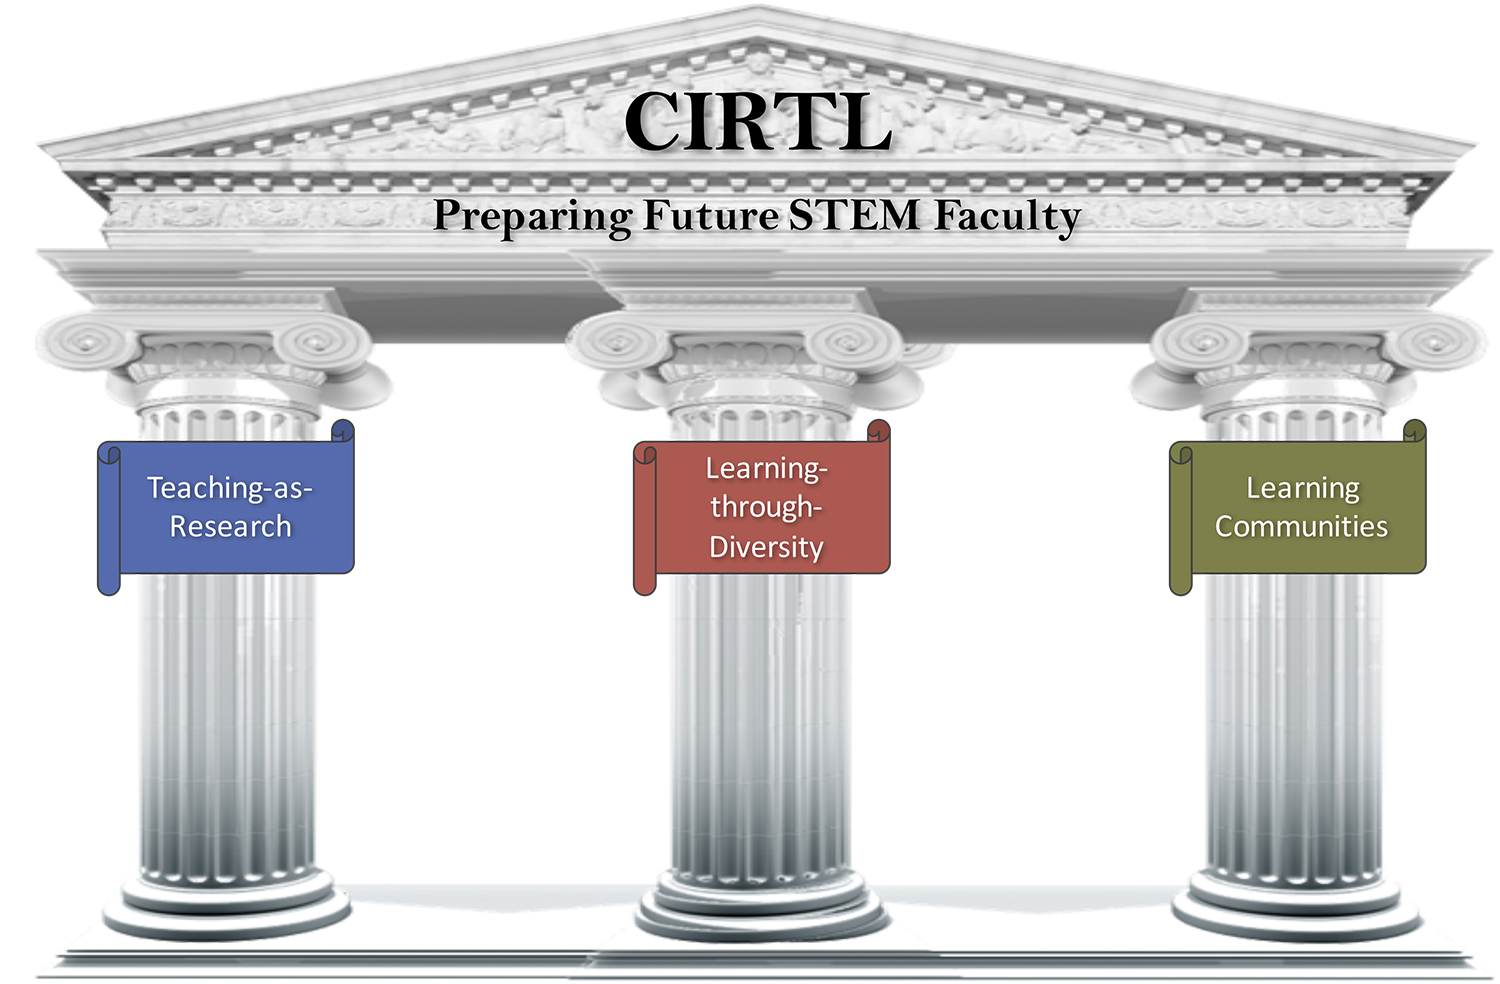 The three pillars of CIRTL - teaching as research, learning through diversity, and learning communities